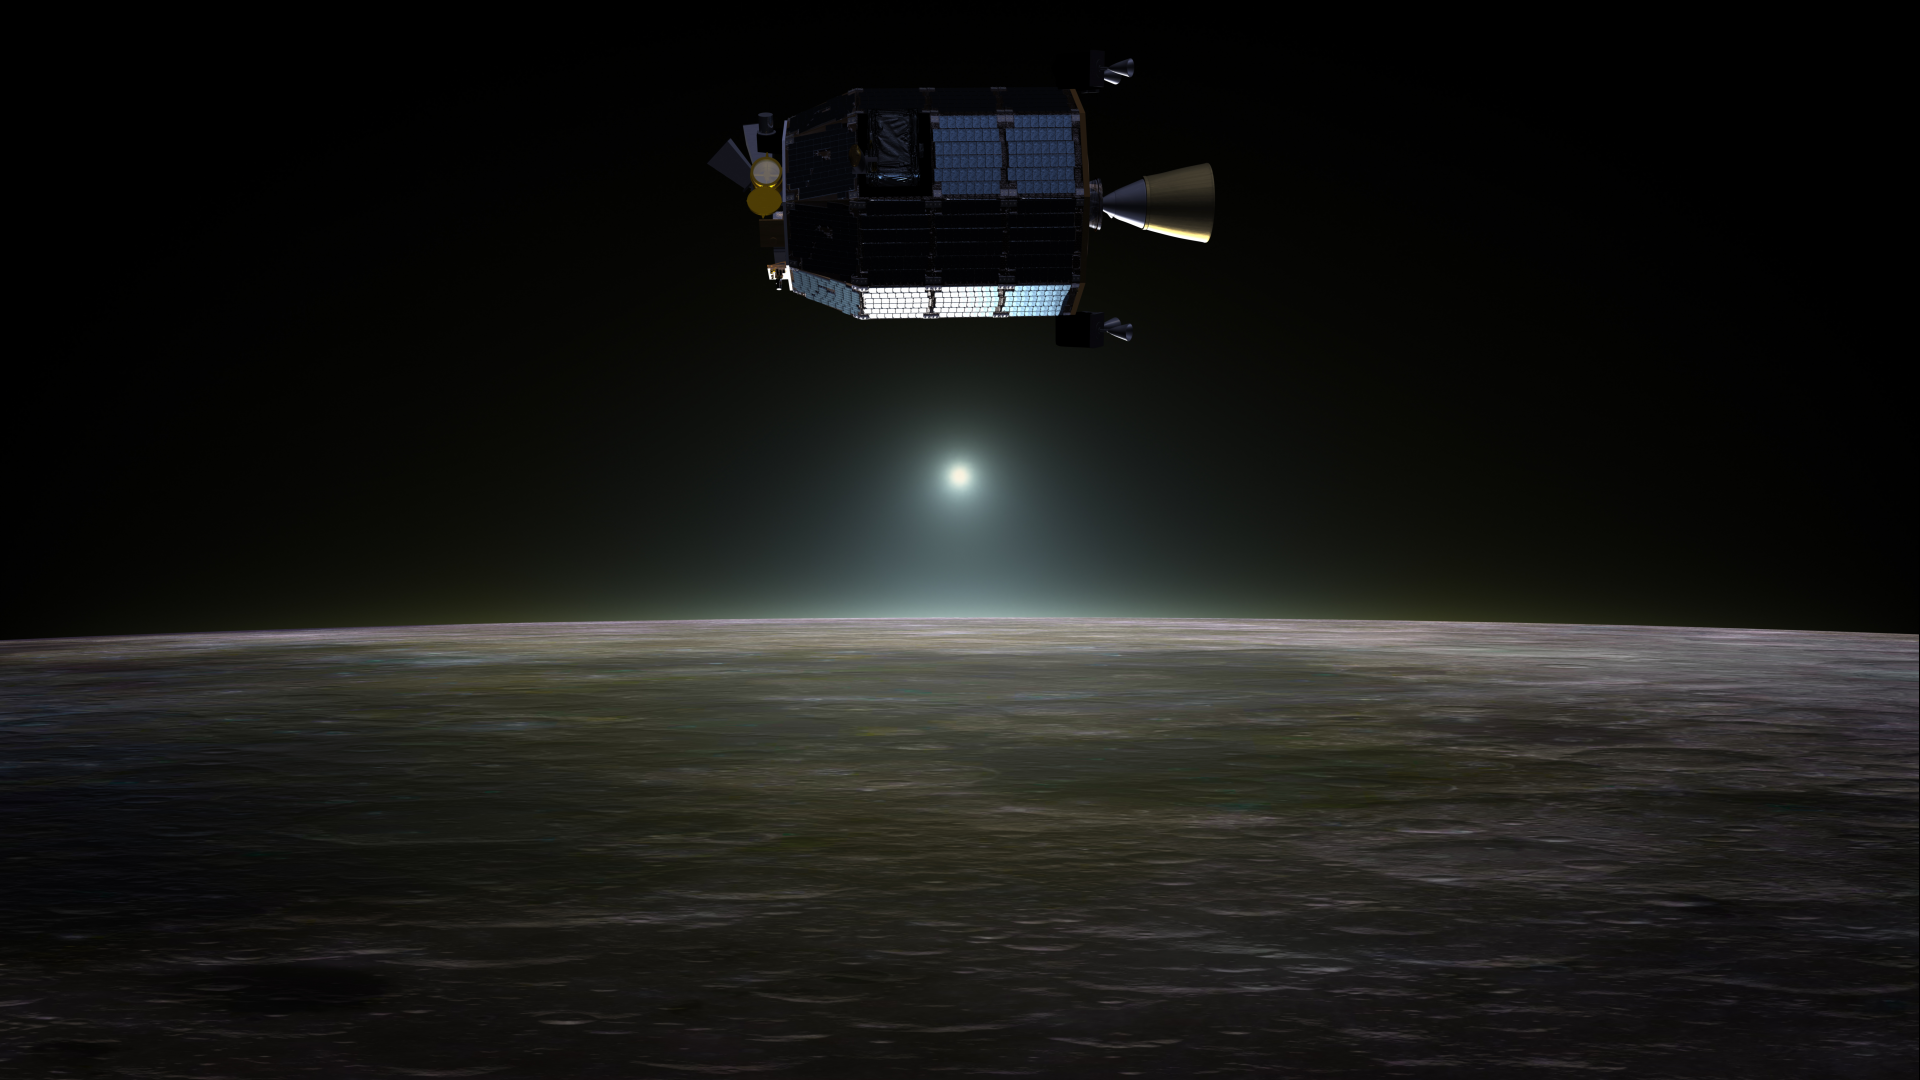 Artist’s concept of NASA's Lunar Atmosphere and Dust Environment Explorer (LADEE) spacecraft in orbit above the moon. Credits: NASA Ames / Dana Berry